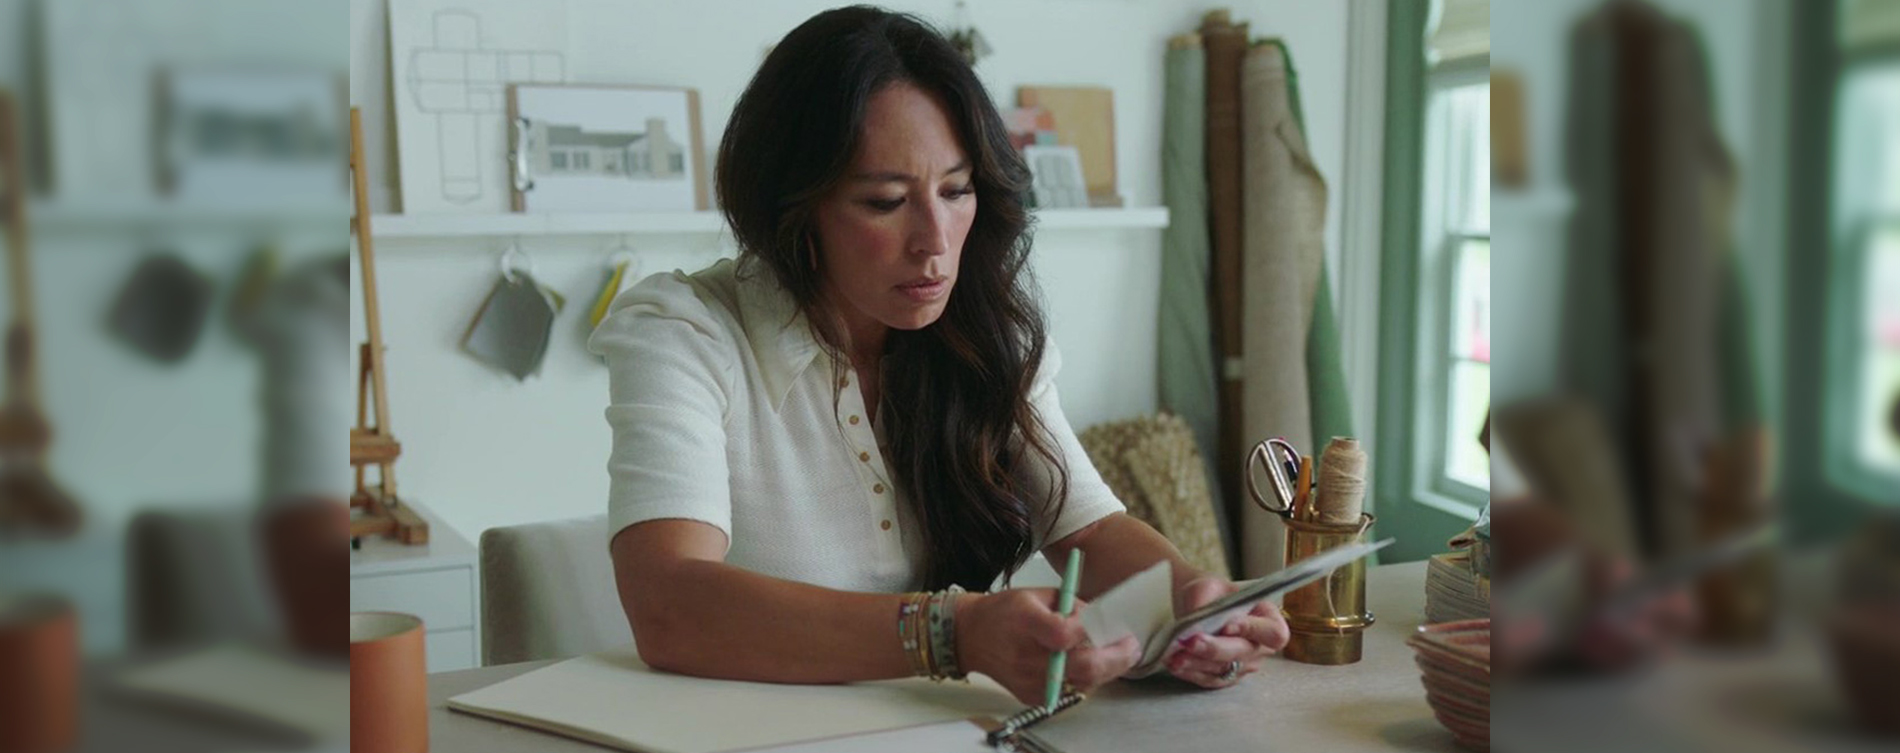 Joanna Gaines' journey to create a collection of hand-selected home exterior products.